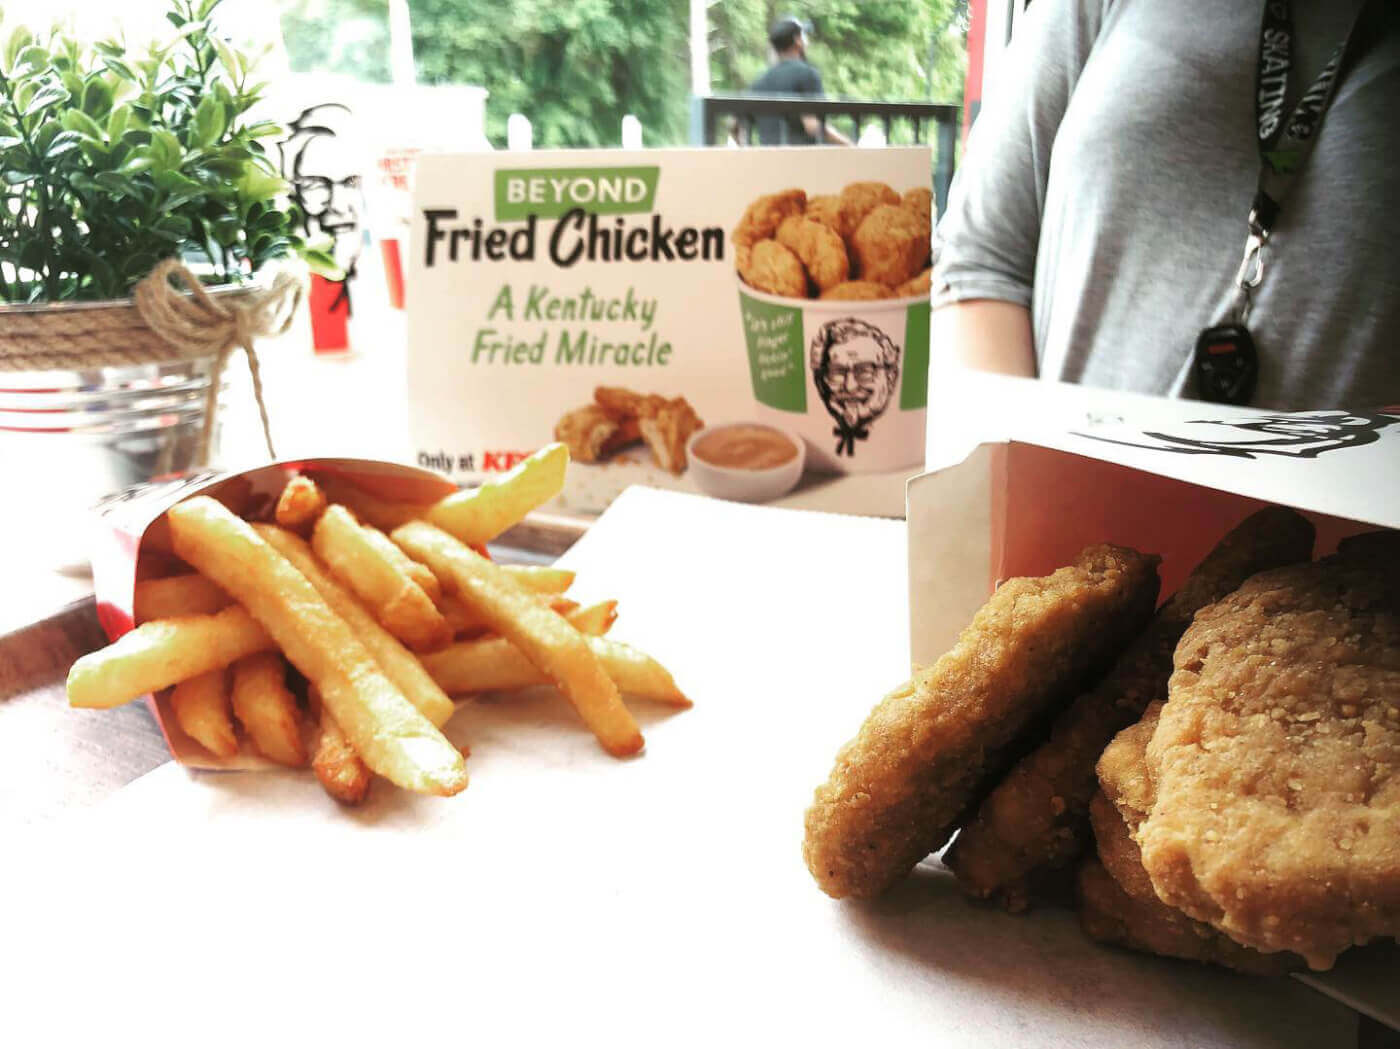 KFC Takes Vegan Fried Chicken to Nearly 4,000 Locations Across the US